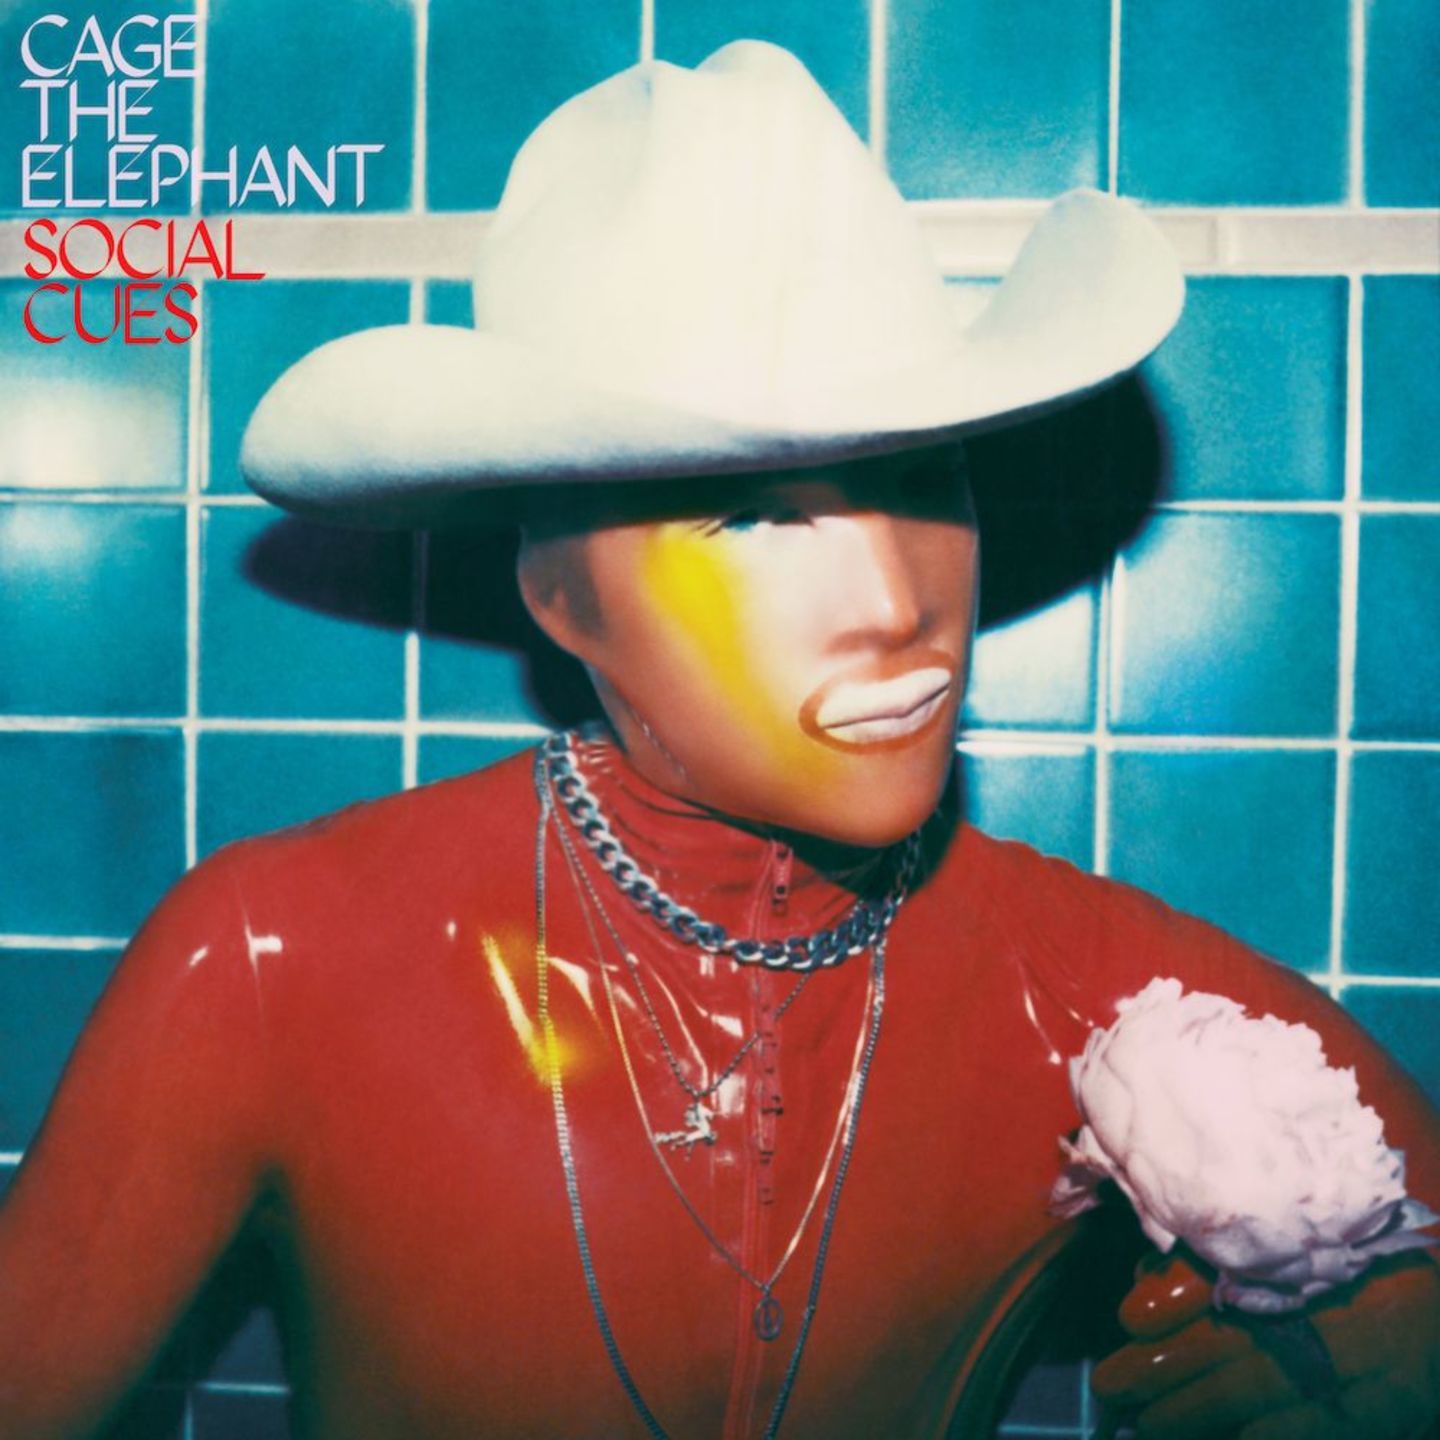 CAGE THE ELEPHANT - Social Cues LP